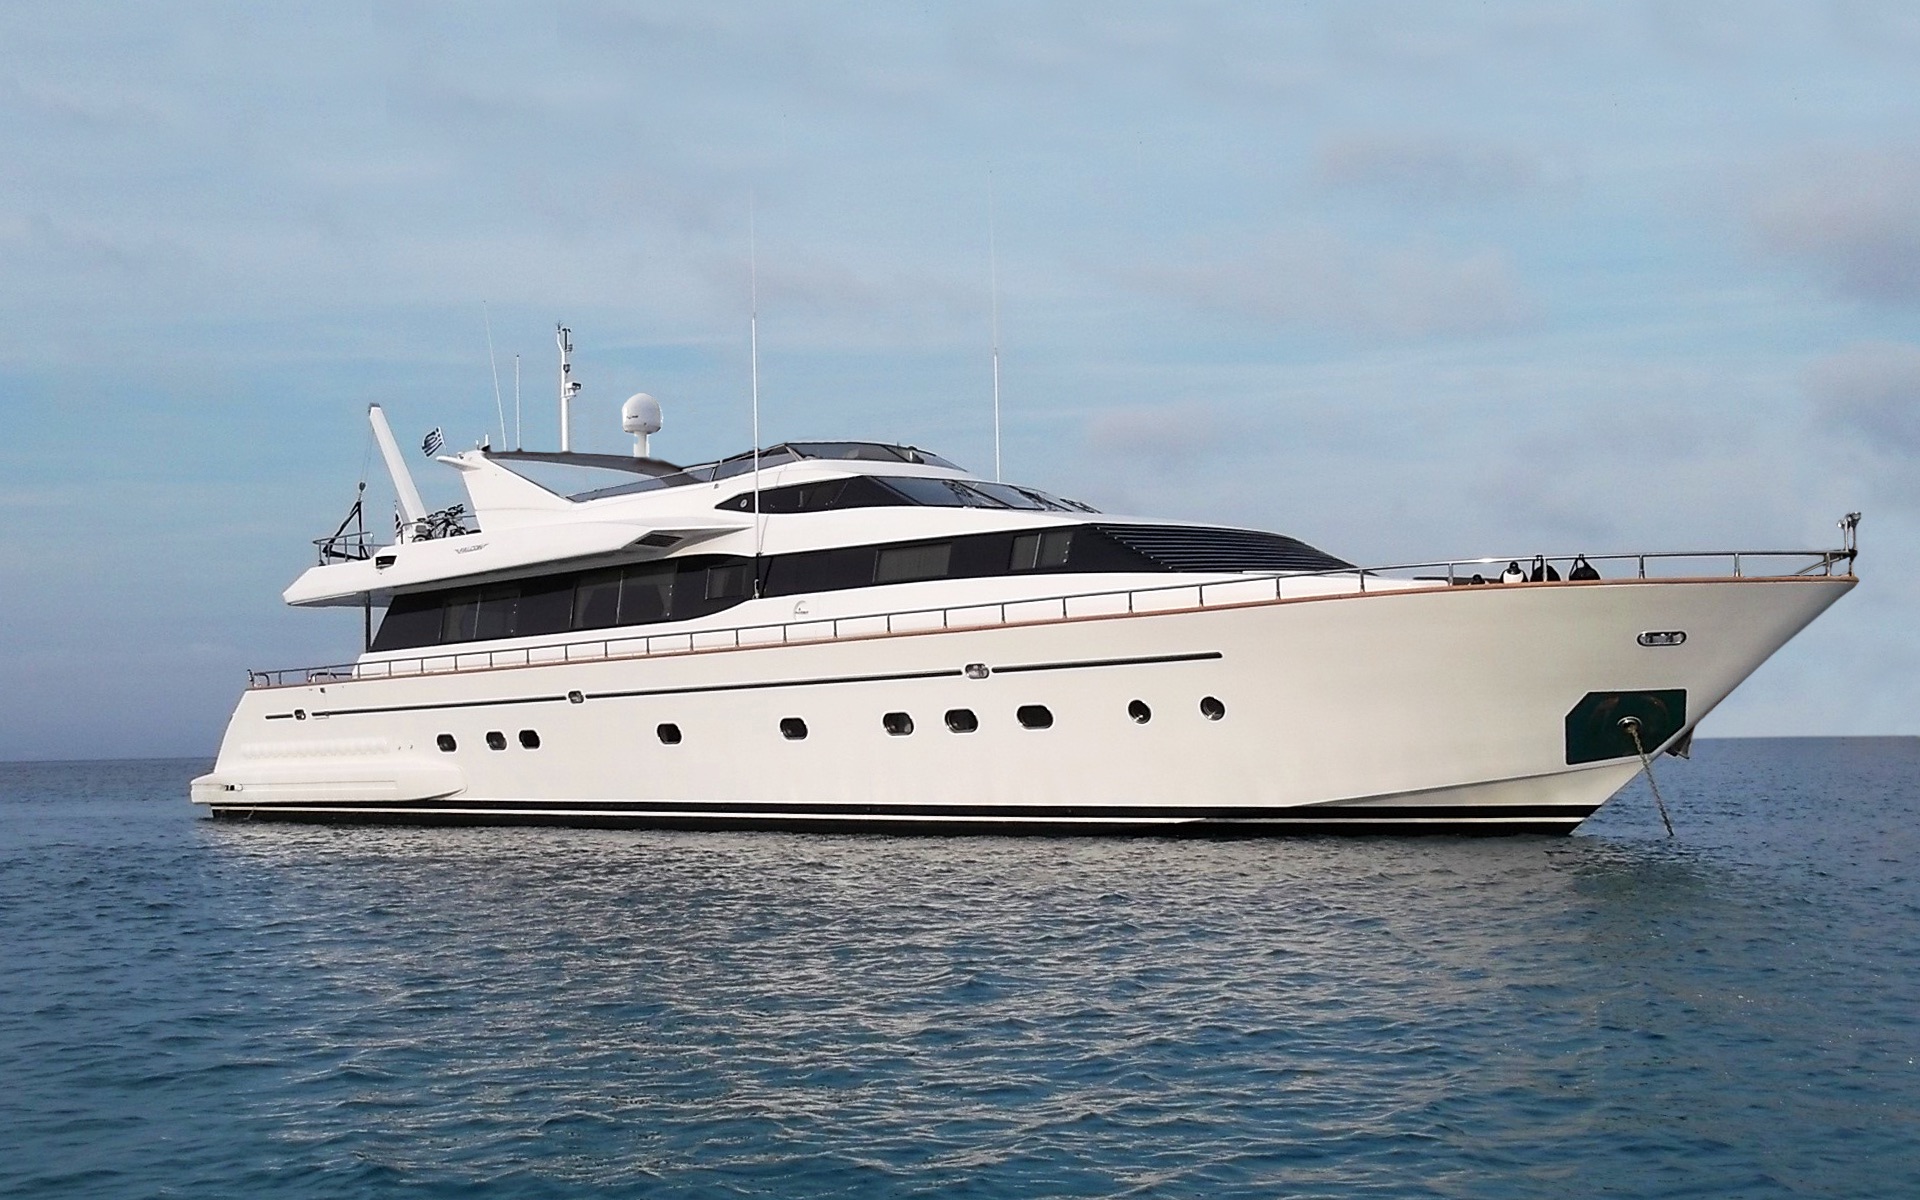 L.O.A. 100ft
Year of built 2002 by Falcon. Refit 2016
Accommodates 10-12 guests in 5 cabins (one Master, one VIP, one double, one twin cabin with a pullman berth, one twin cabin convertible to double with a pullman berth, all with en-suite facilities)
Cruising speed 22 knots 
Crew of 6
Engine fuel consumption 580ltrs/hour, generators 200ltrs/day.